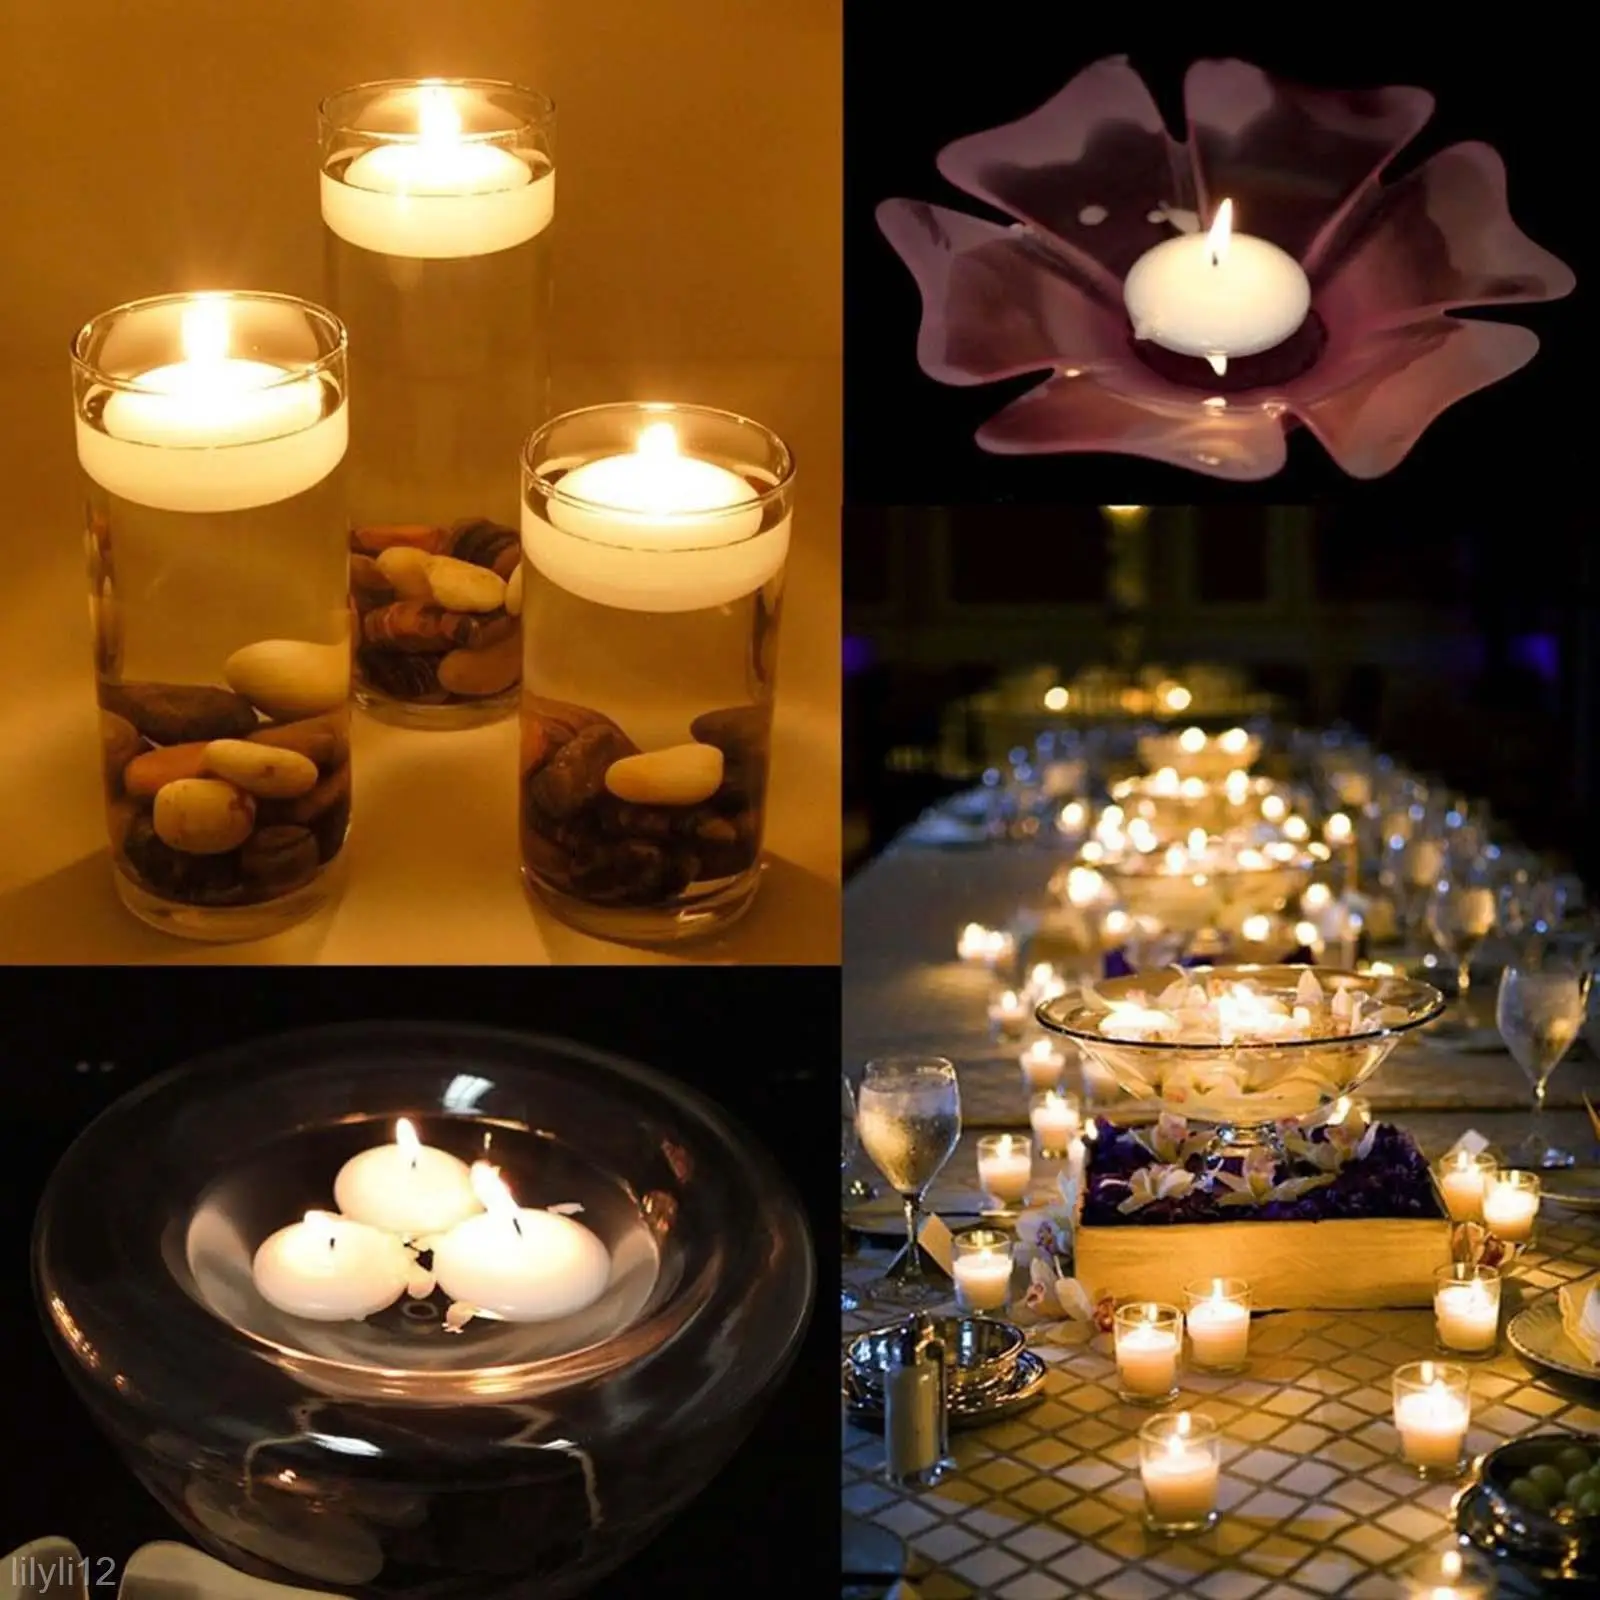 FLOATING WATER CANDLES UNSCENTED HOME DECOR WEDDING BIRTHDAY PARTY 